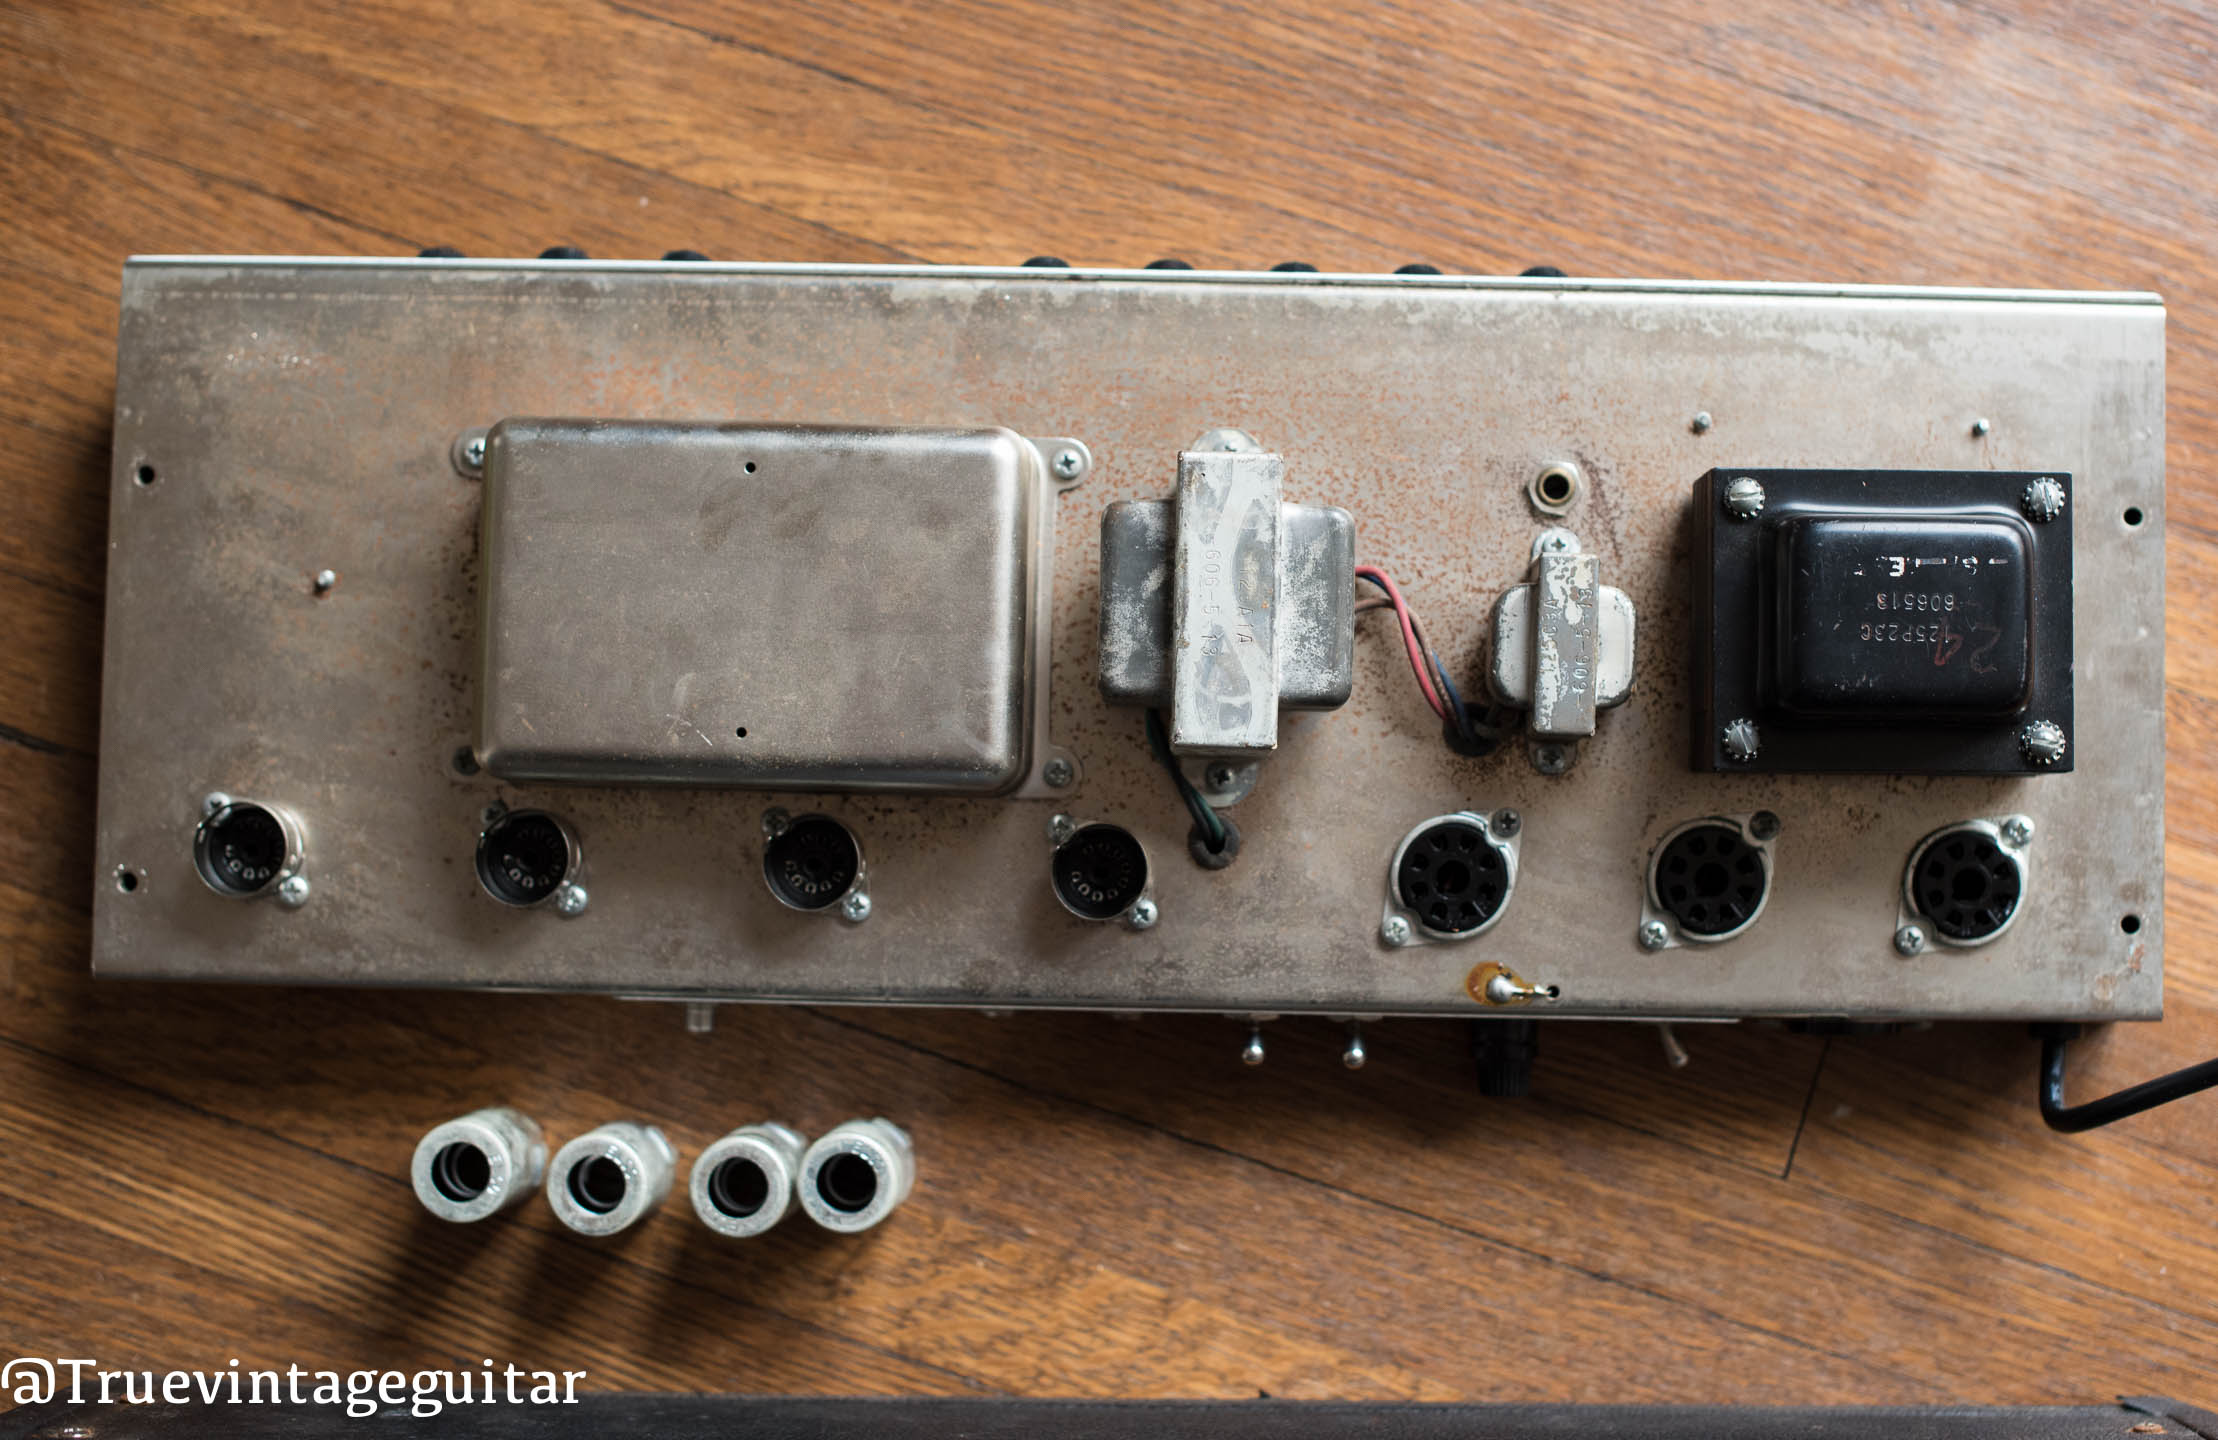 output transformer, power transformer, chassis, 1965 Fender Deluxe amp